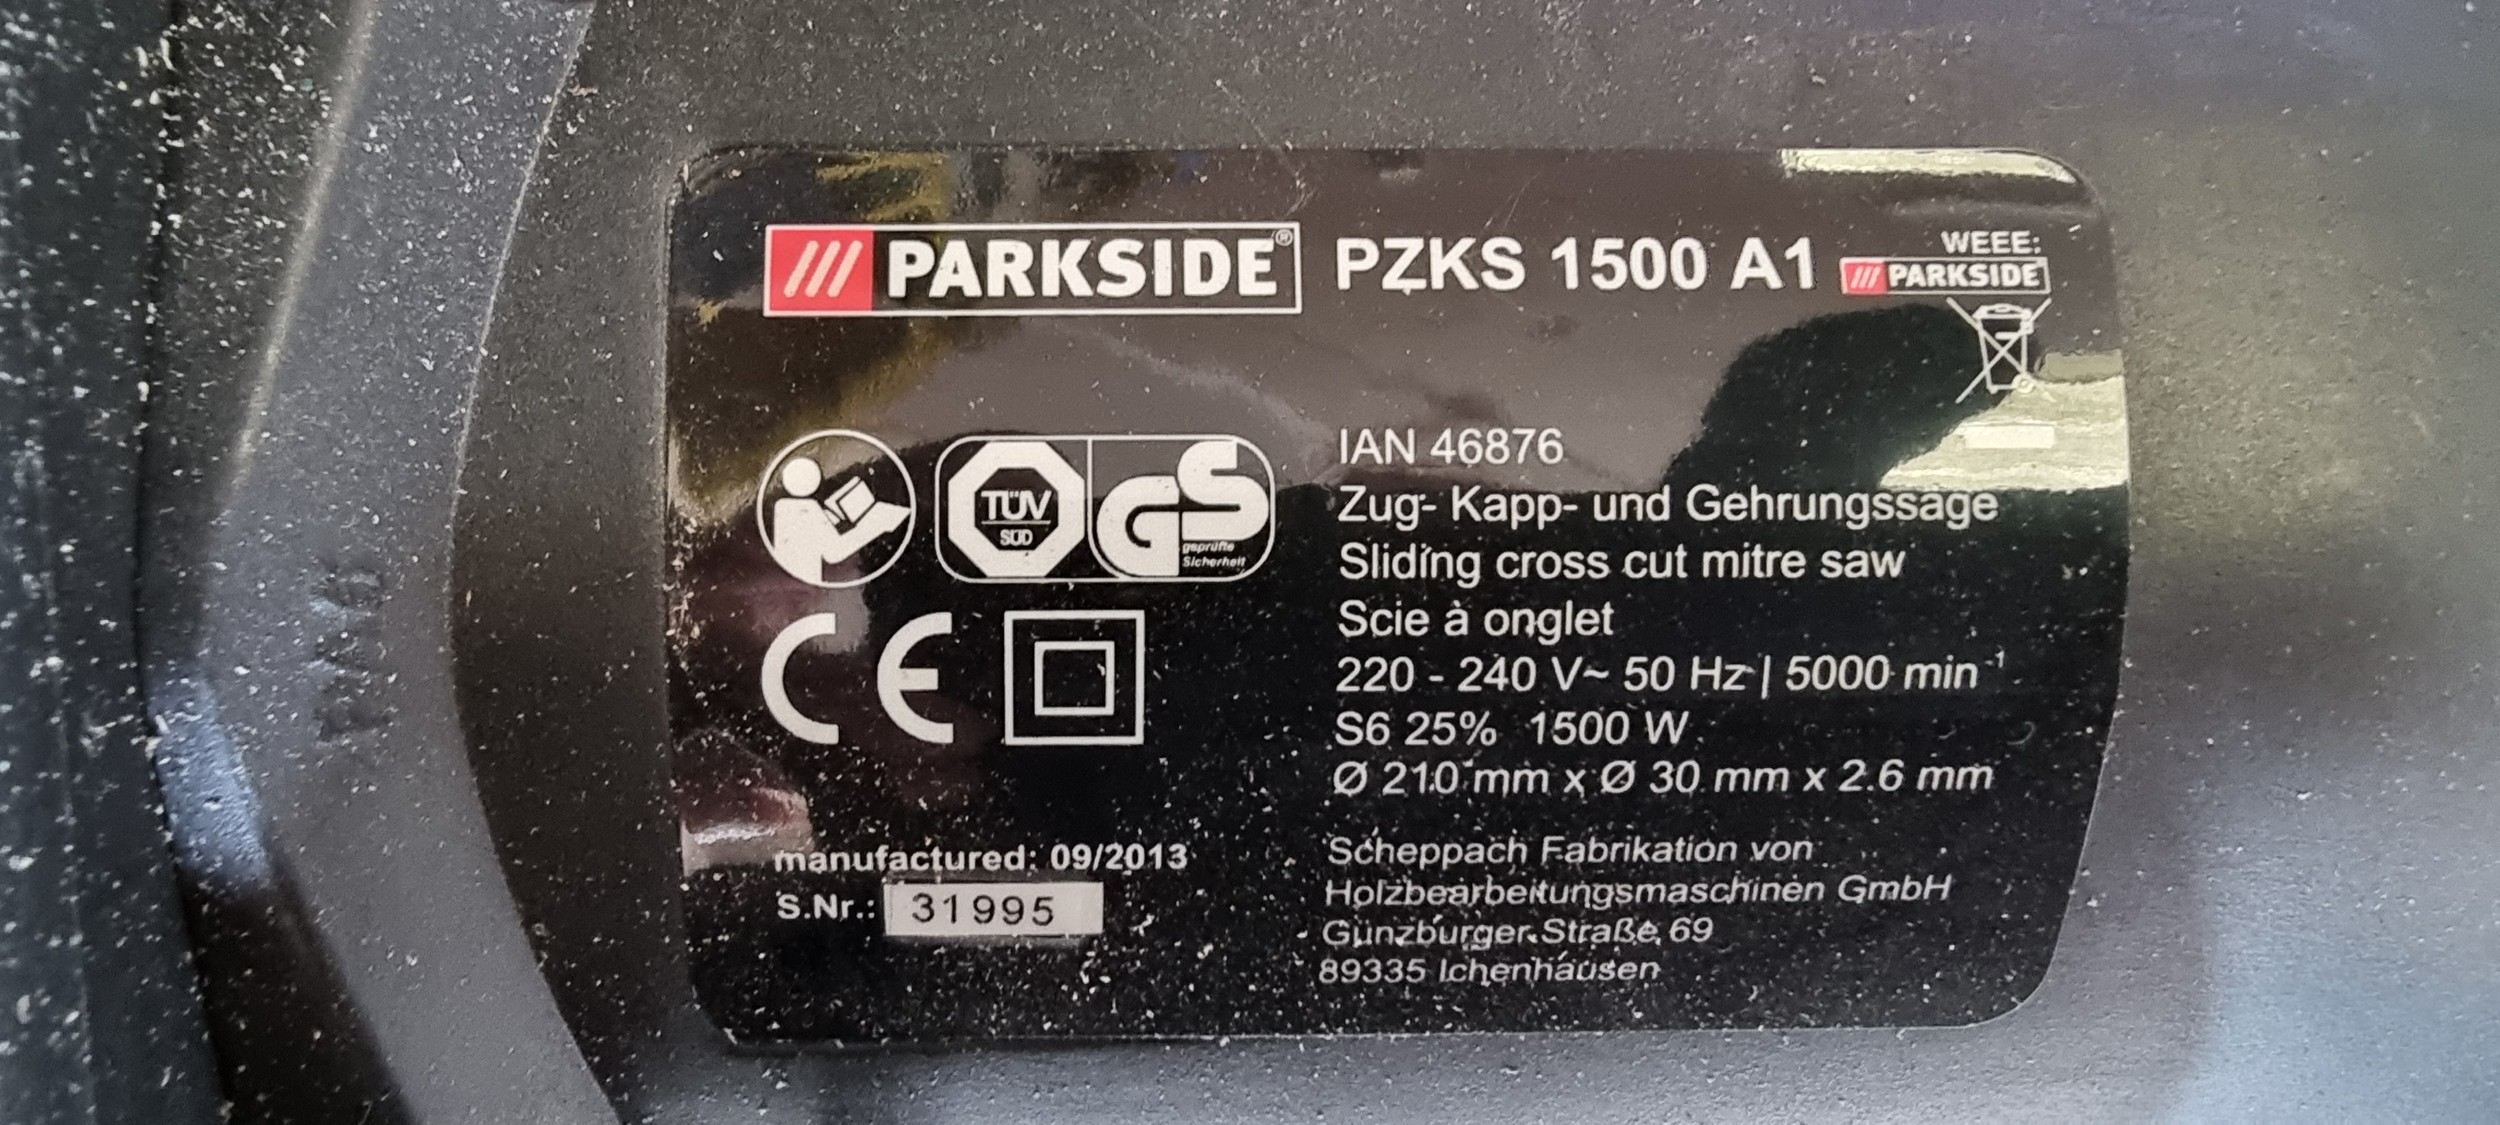 A Parkside PZKS 1500 A1 bench saw - Image 3 of 3